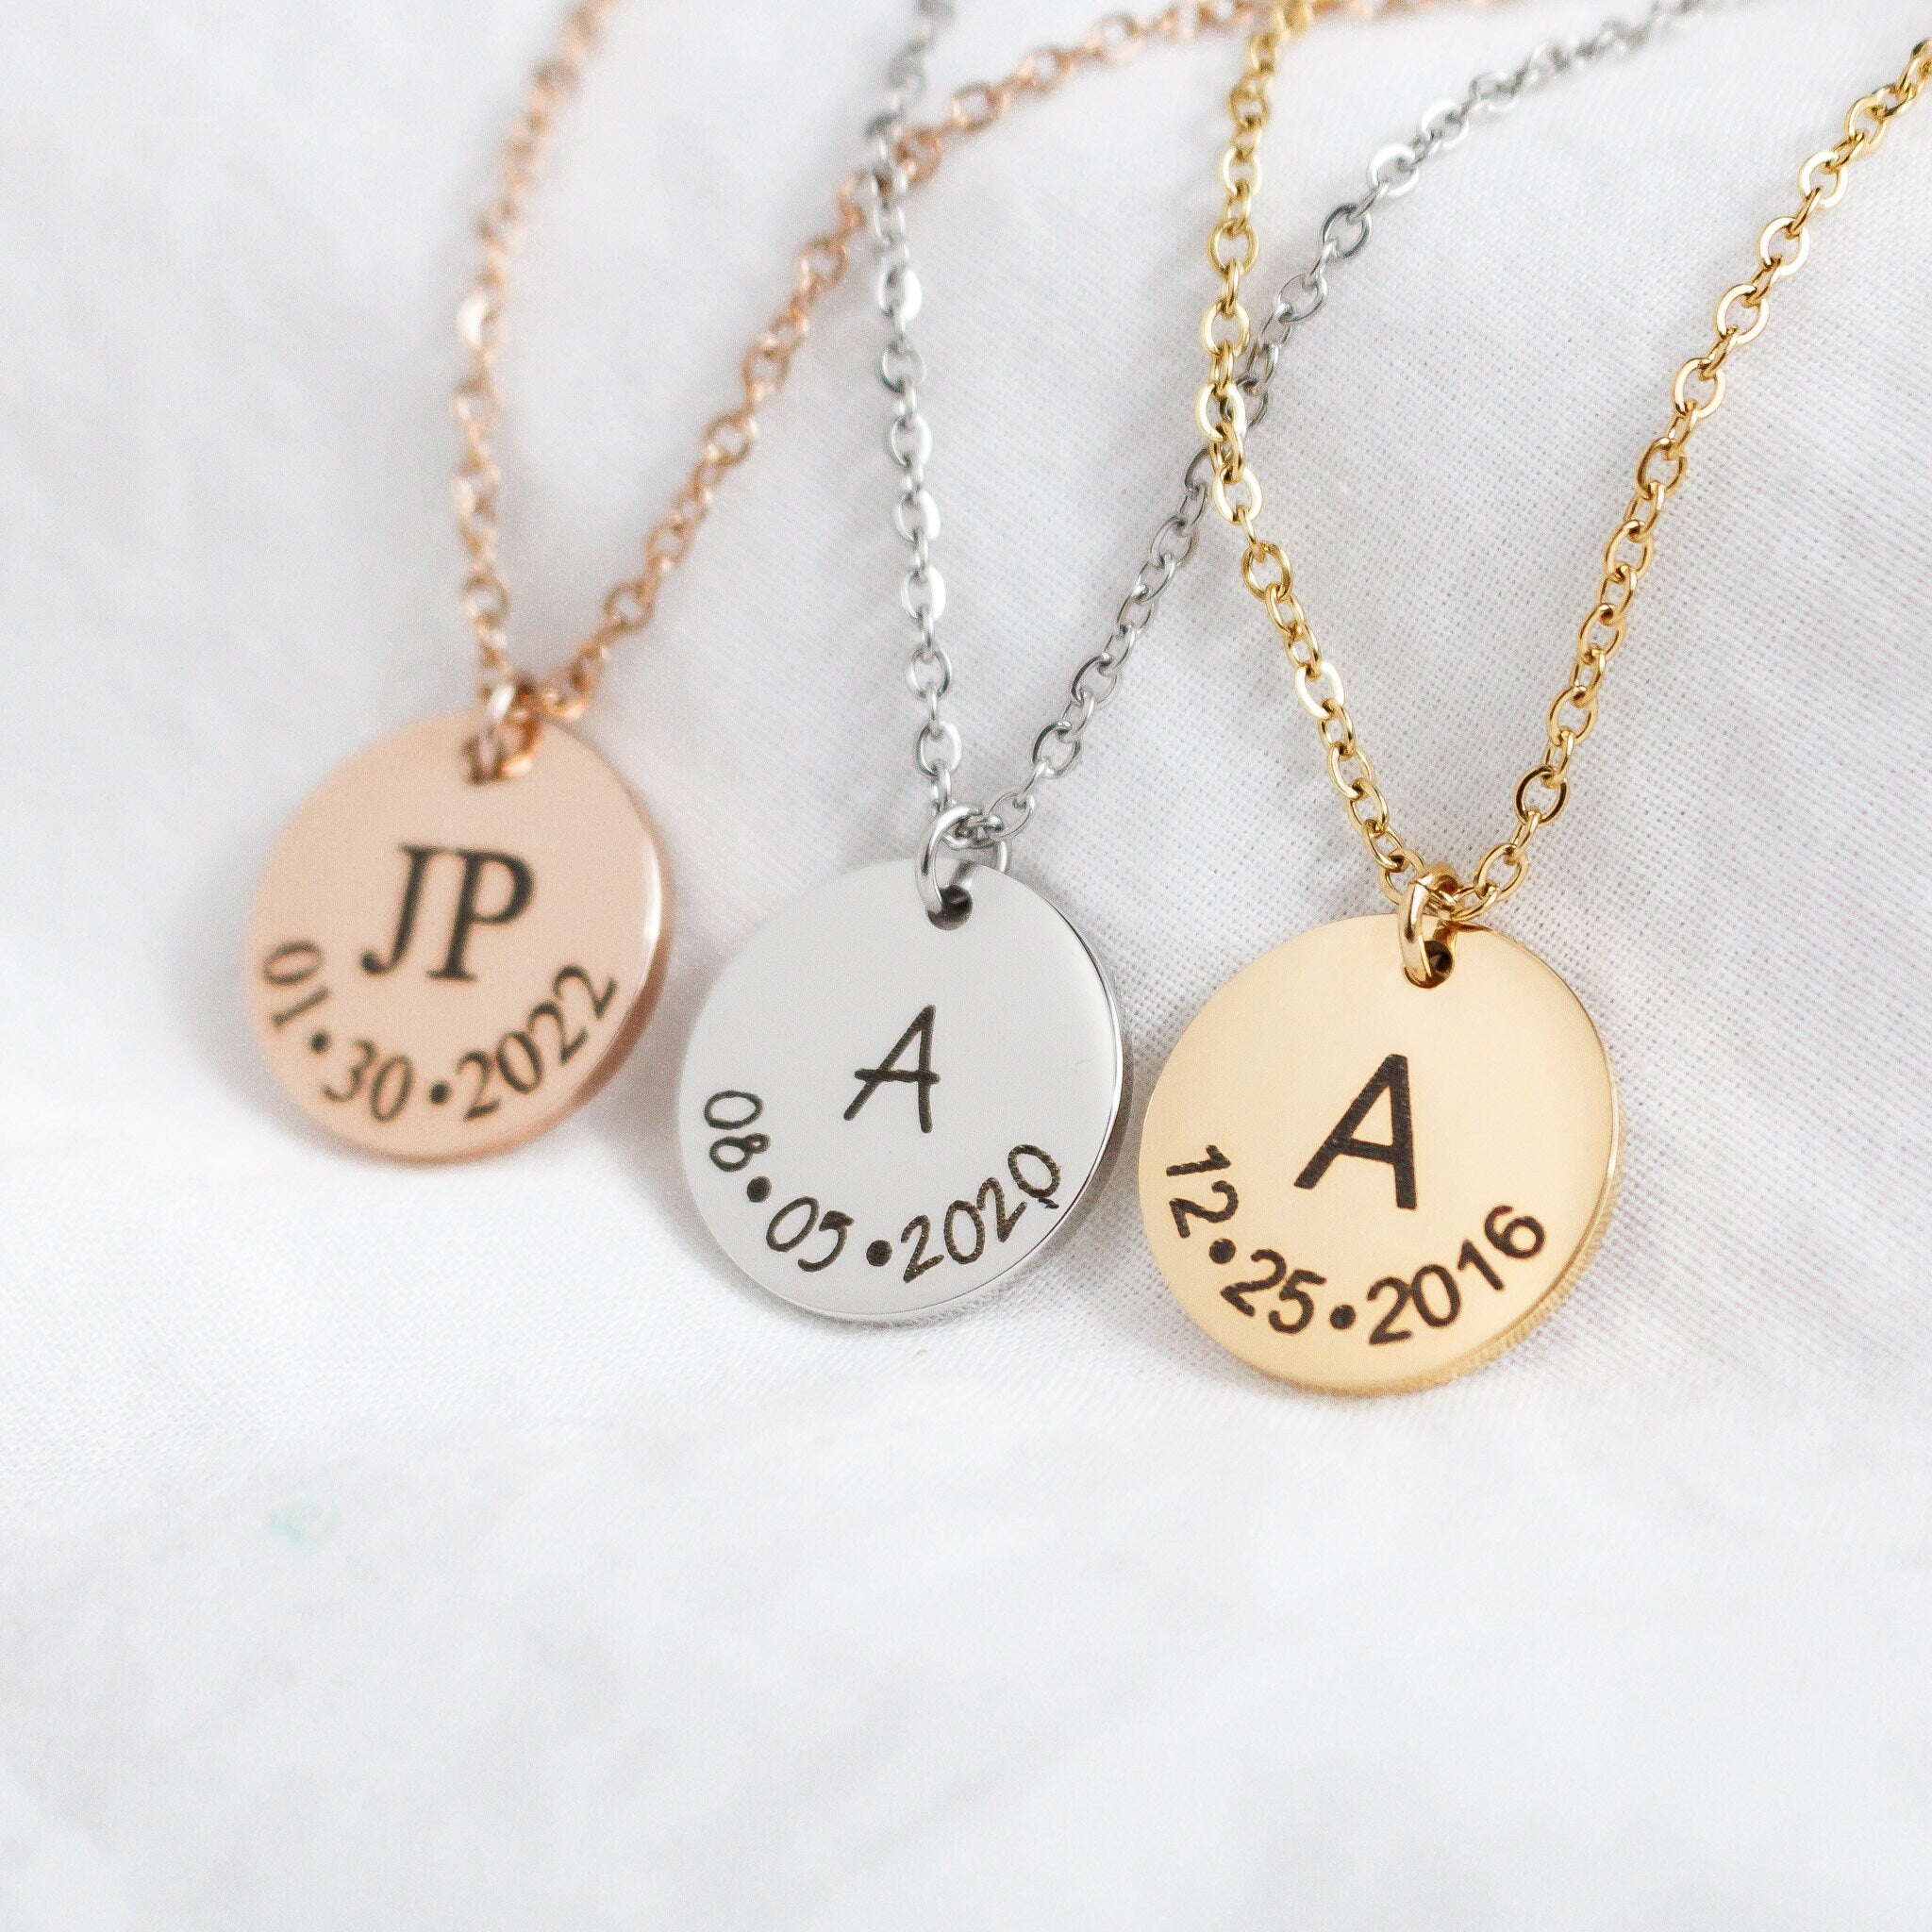 Personalized Monogrammed Initials and Date Necklace, Initial necklace, Date necklace, dating anniversary, unique gifts for girlfriend